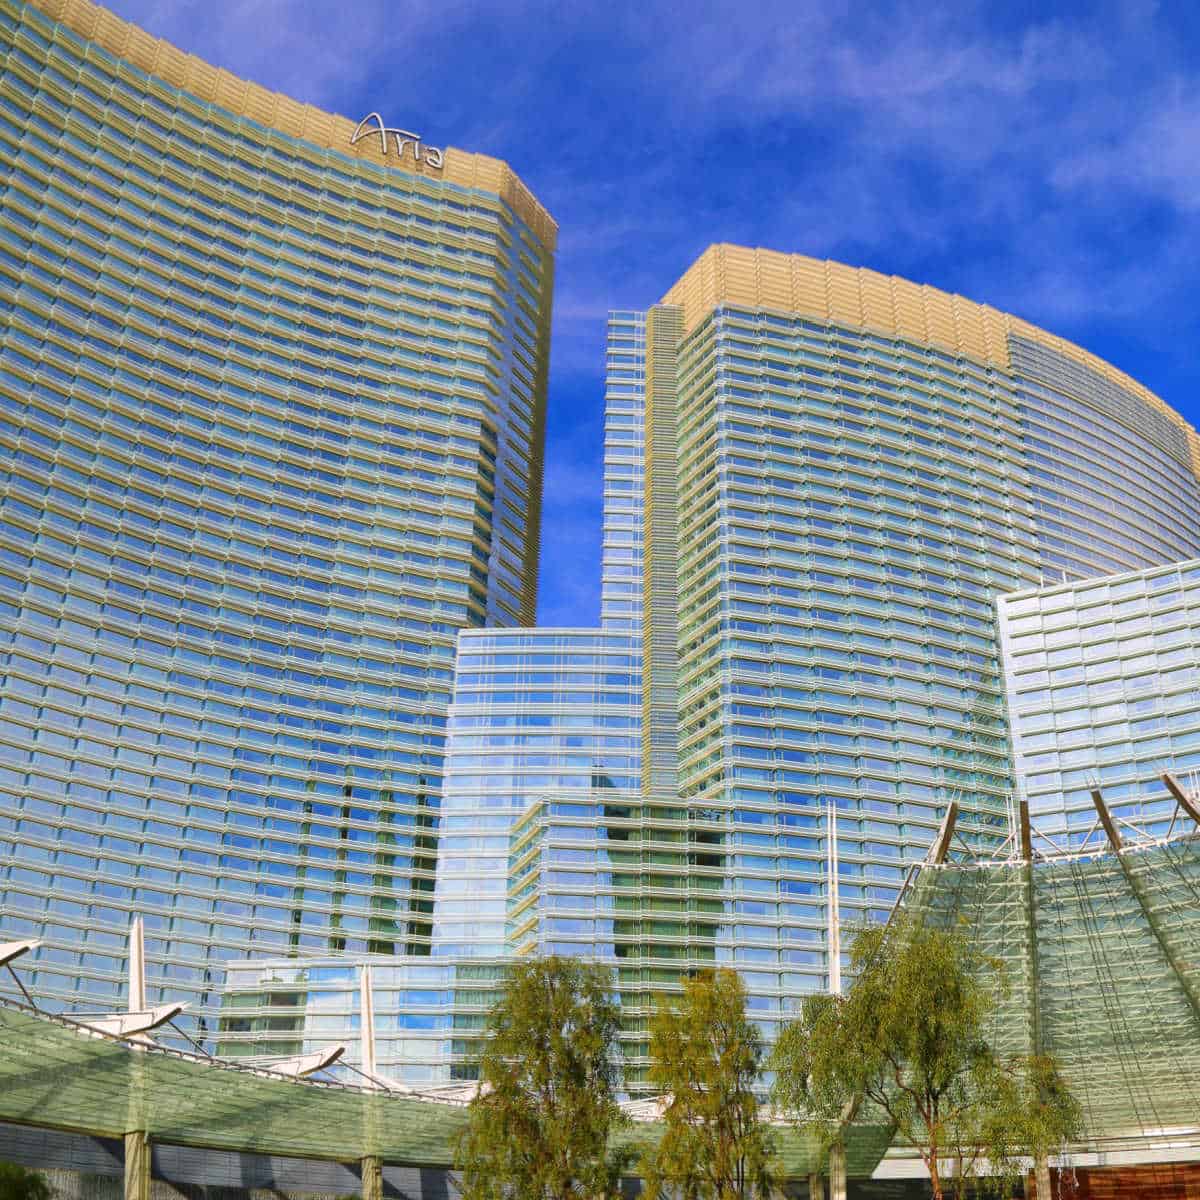 Aria Hotel exterior with blue skies